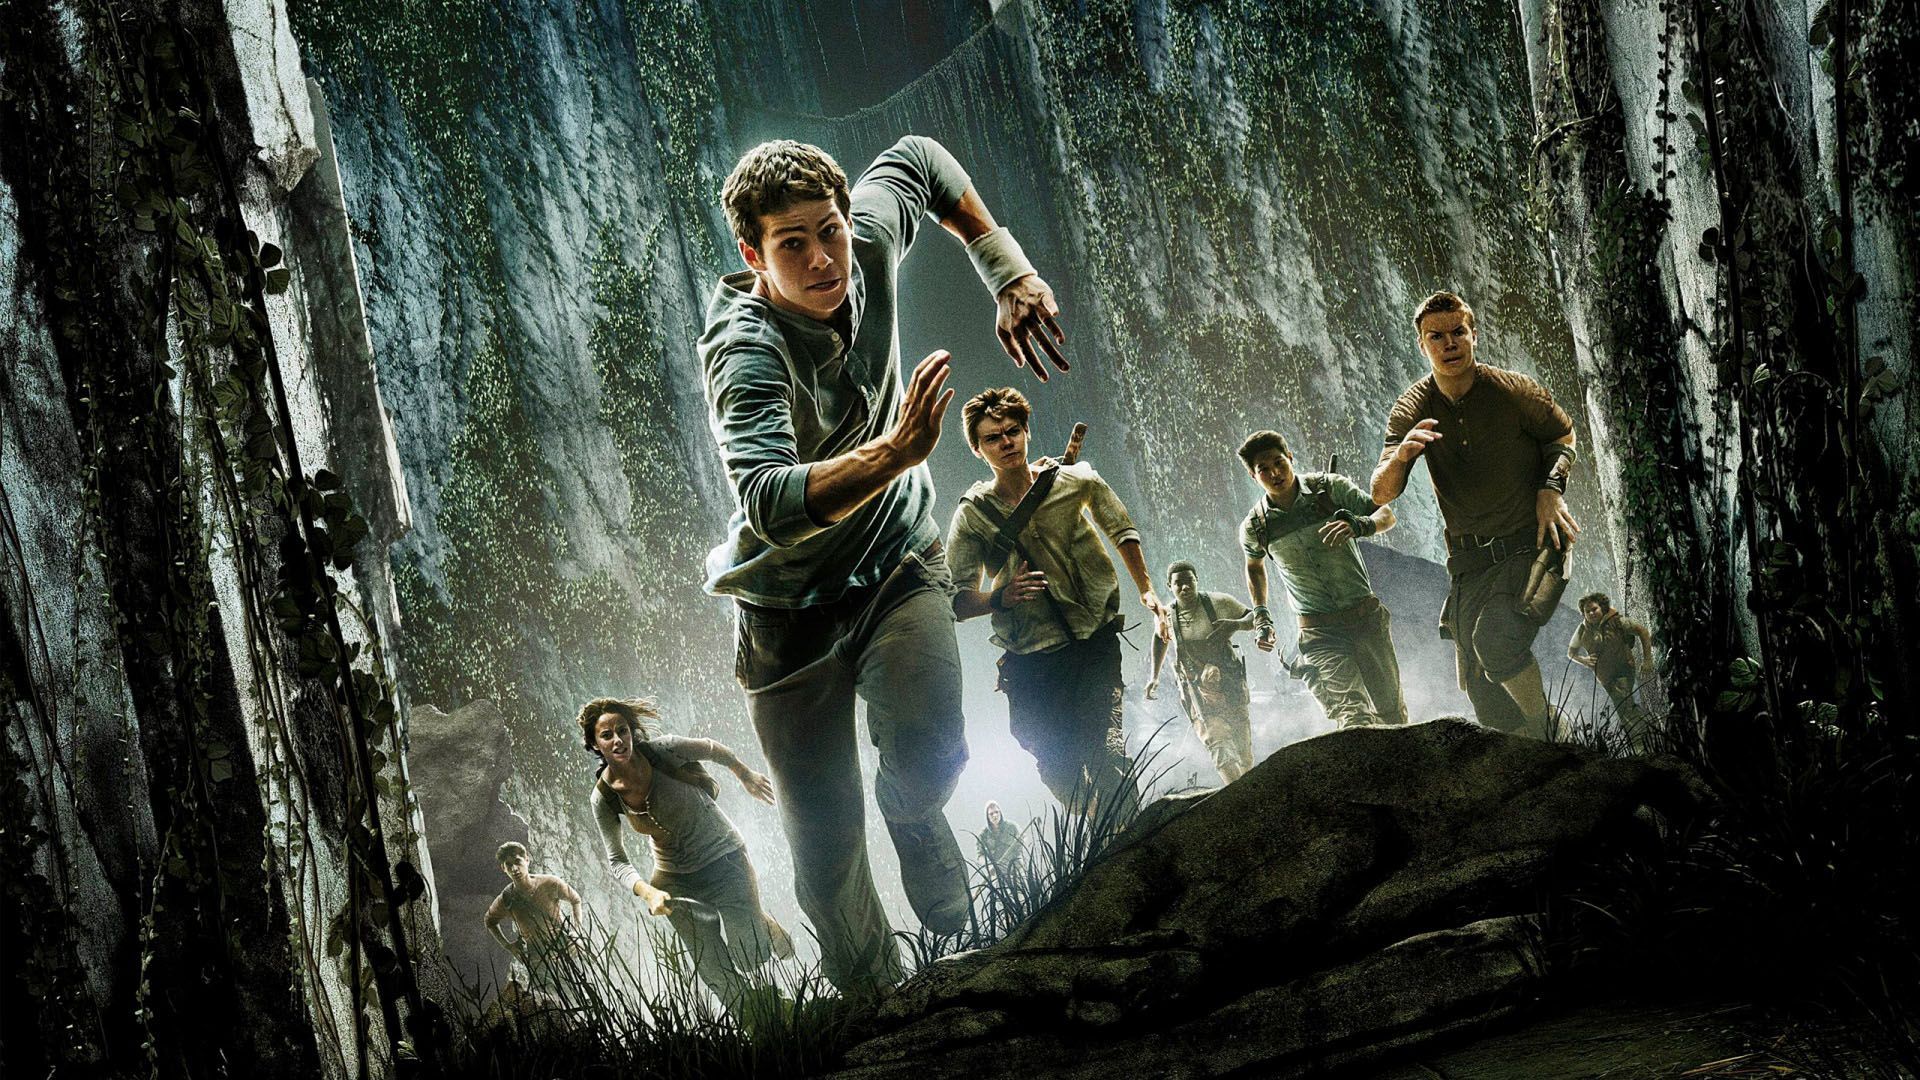 The Maze Runner Free Wallpaper Backgrounds For Computer.